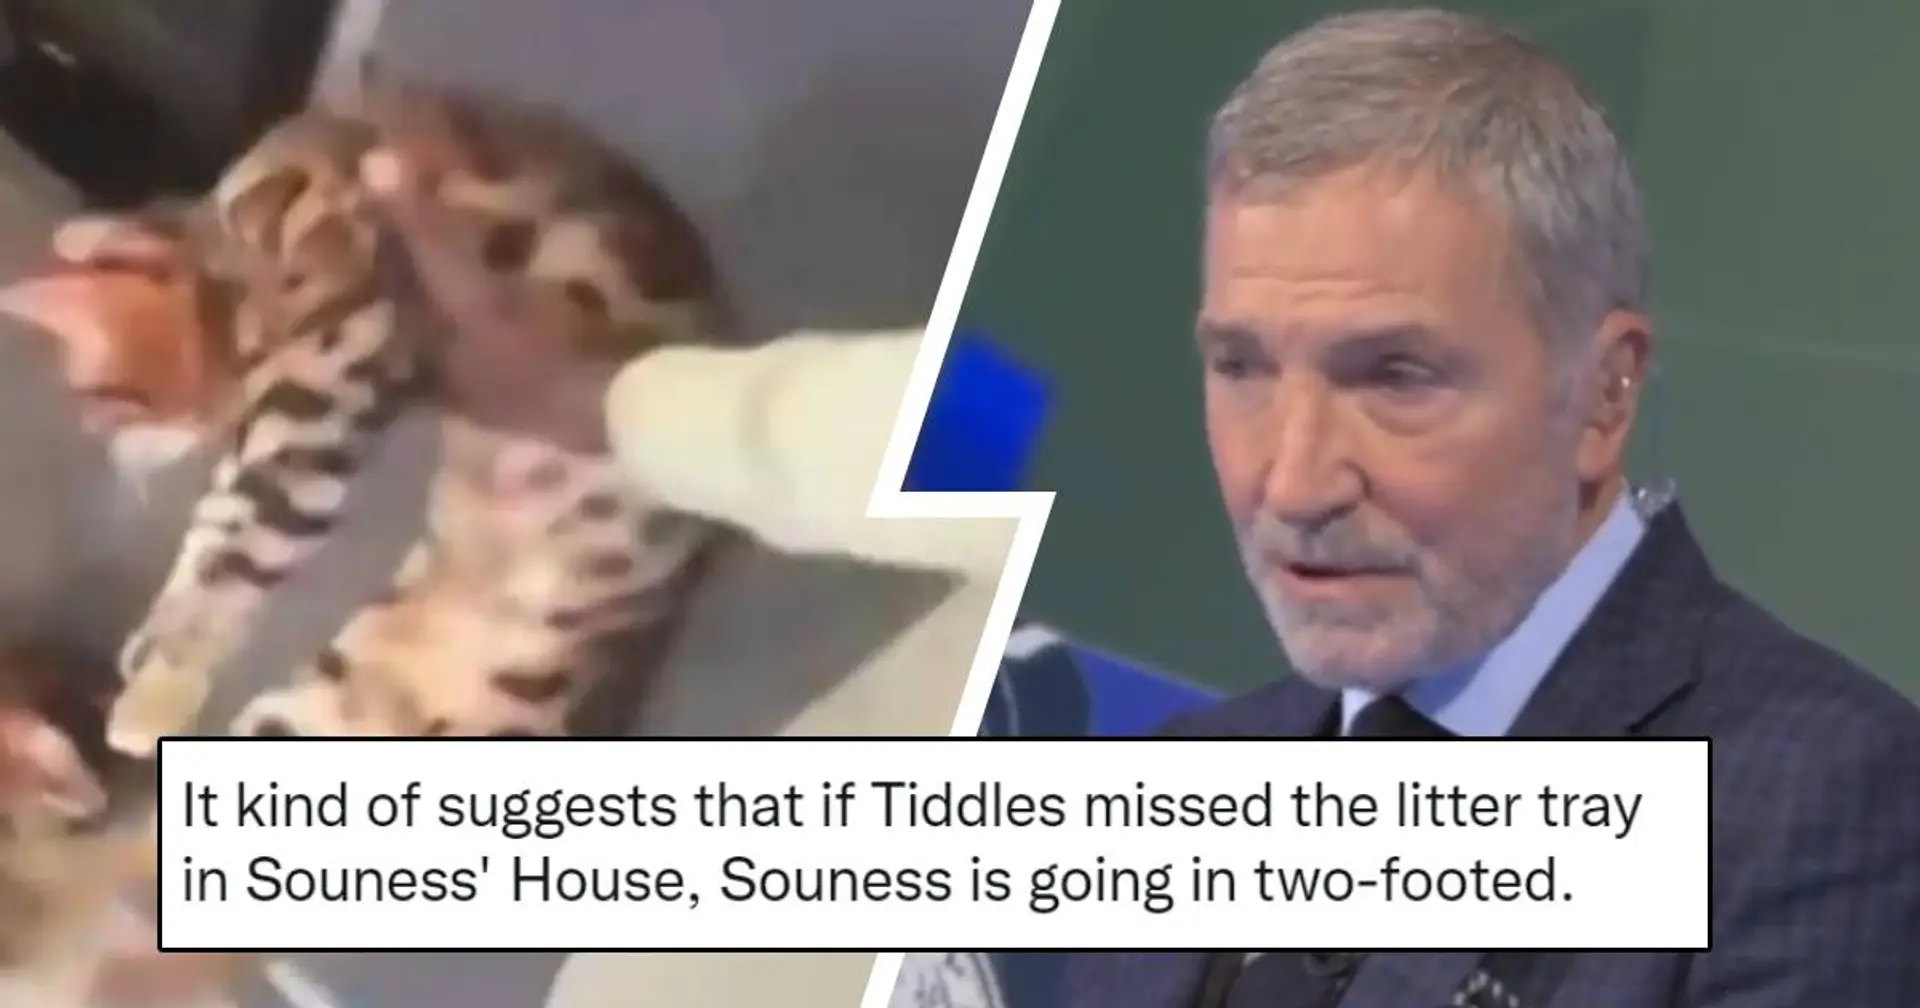 'No way is this real': Graeme Souness goes viral with his take on Zouma kicking cat (video)